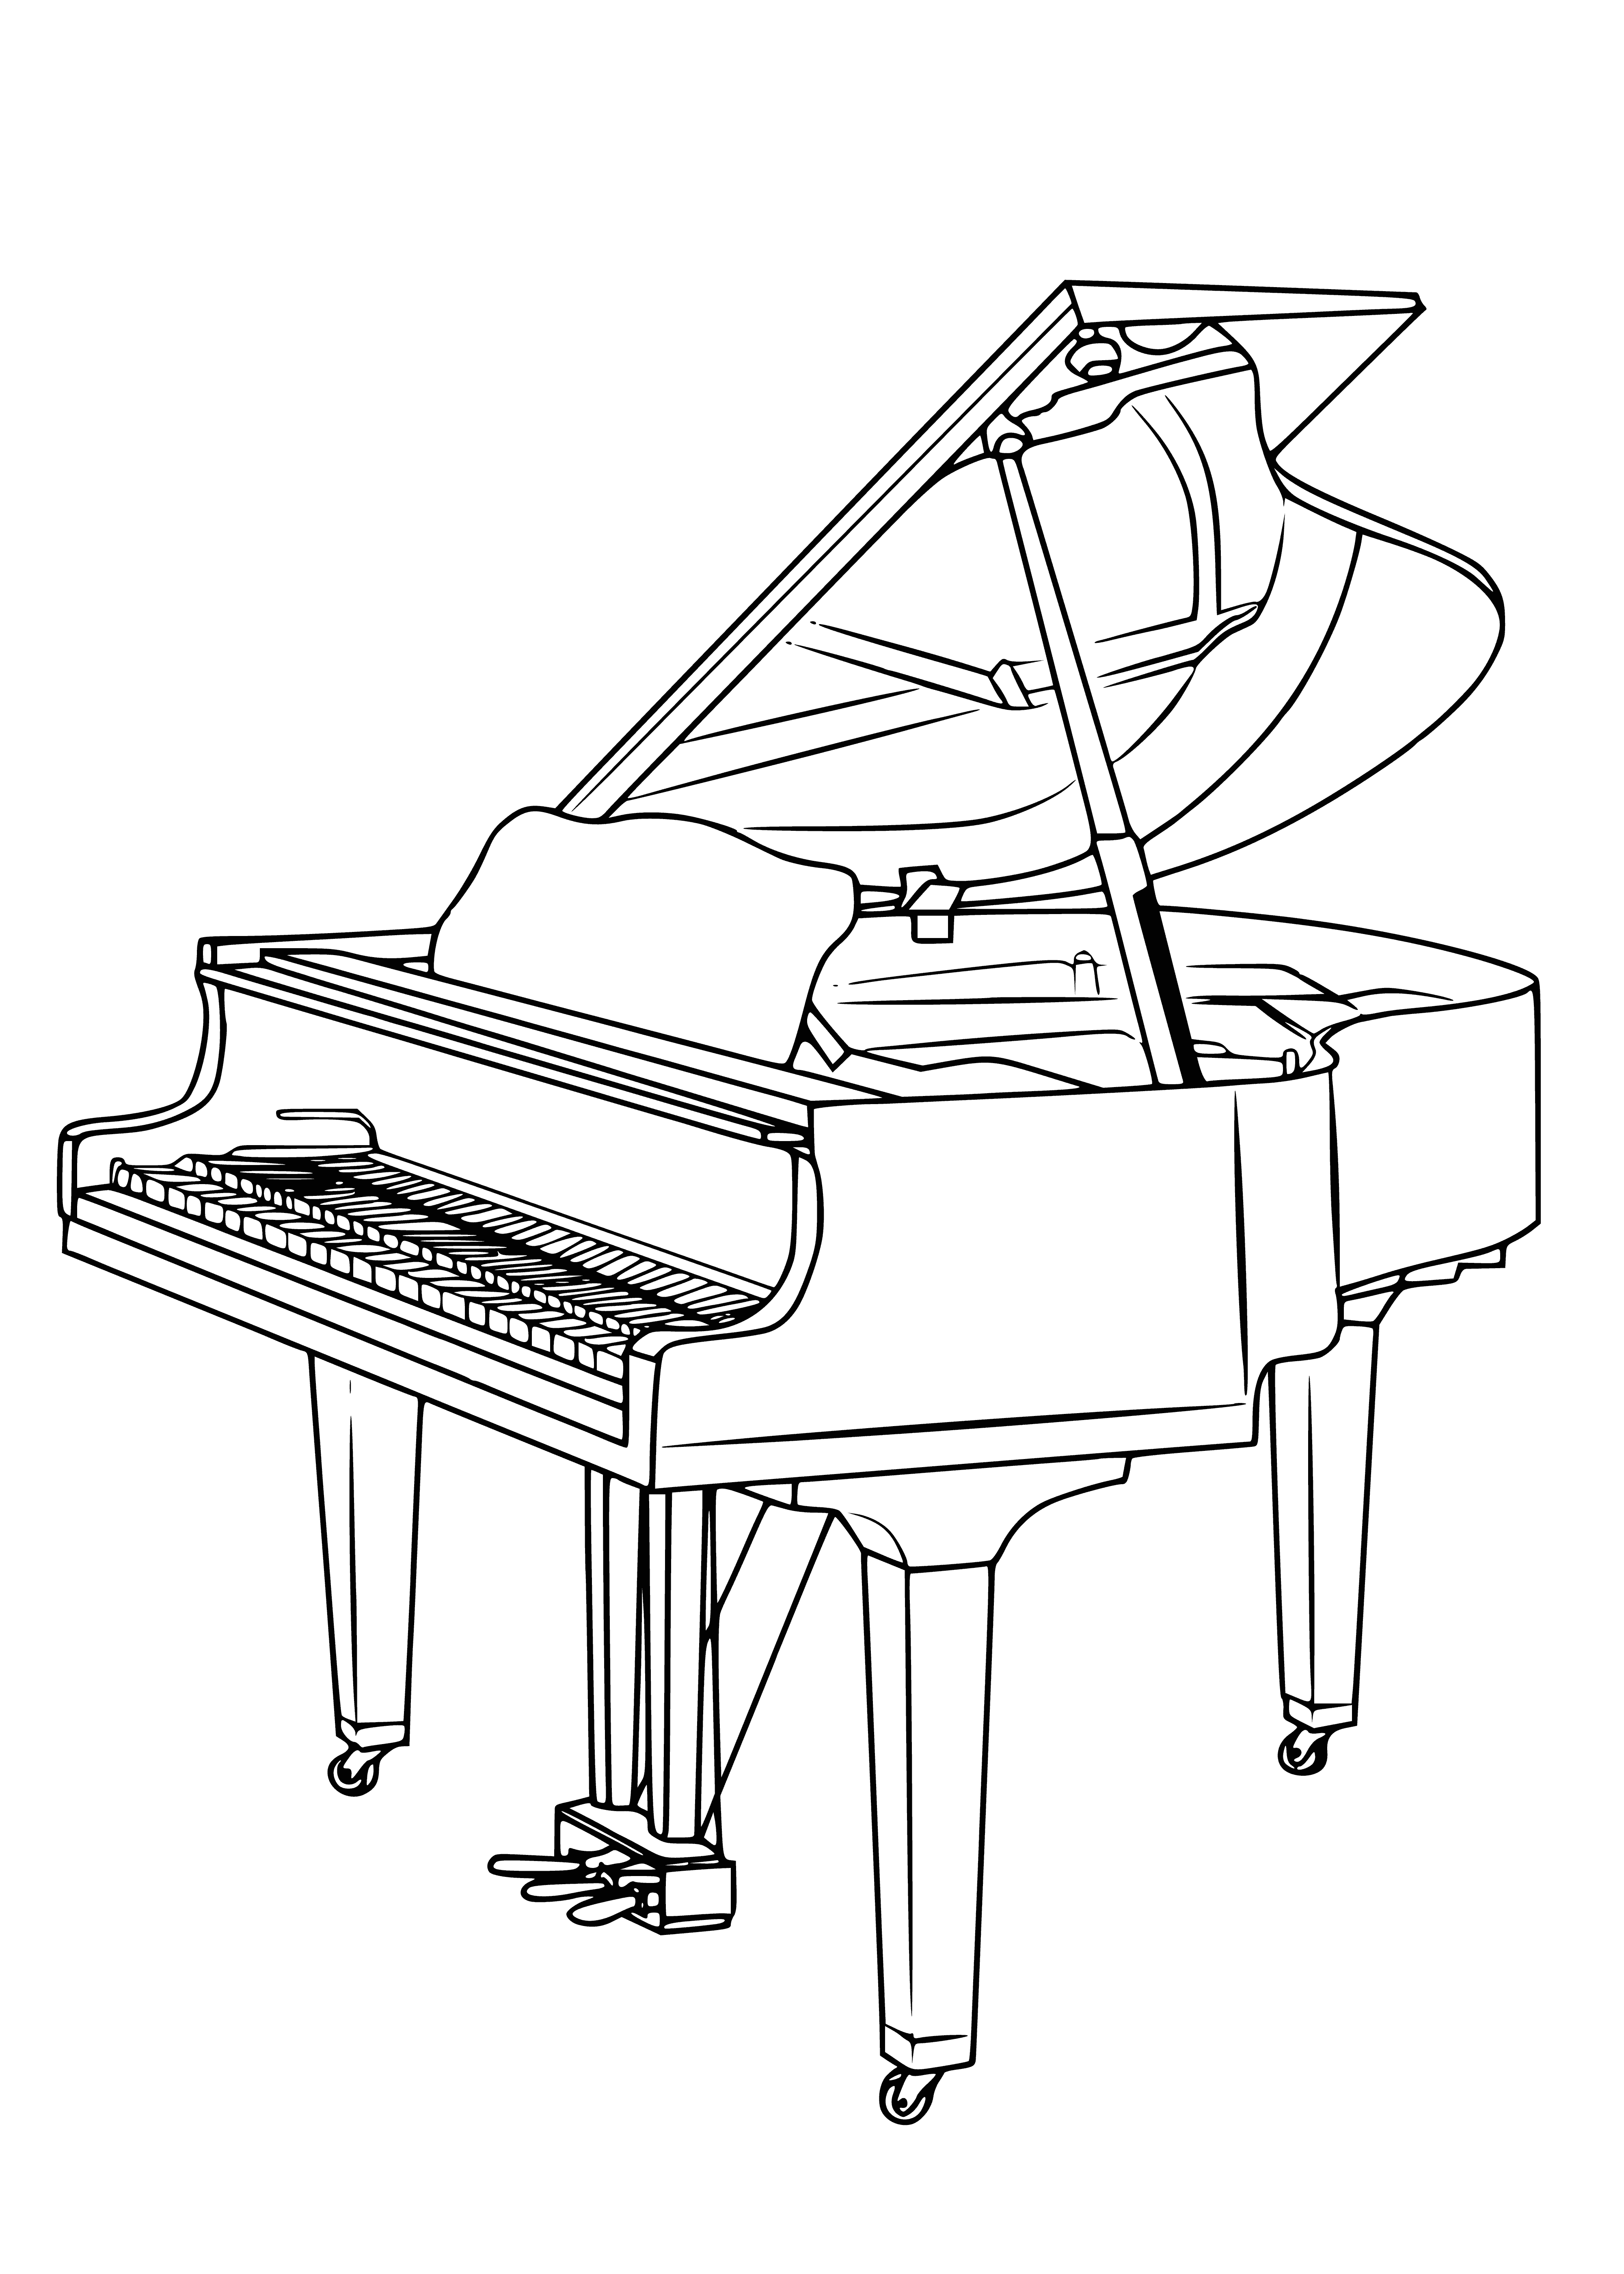 coloring page: 140 characters: Person seated at grand piano in dimly lit room, hands on keys, head slightly back, lost in musical reverie.